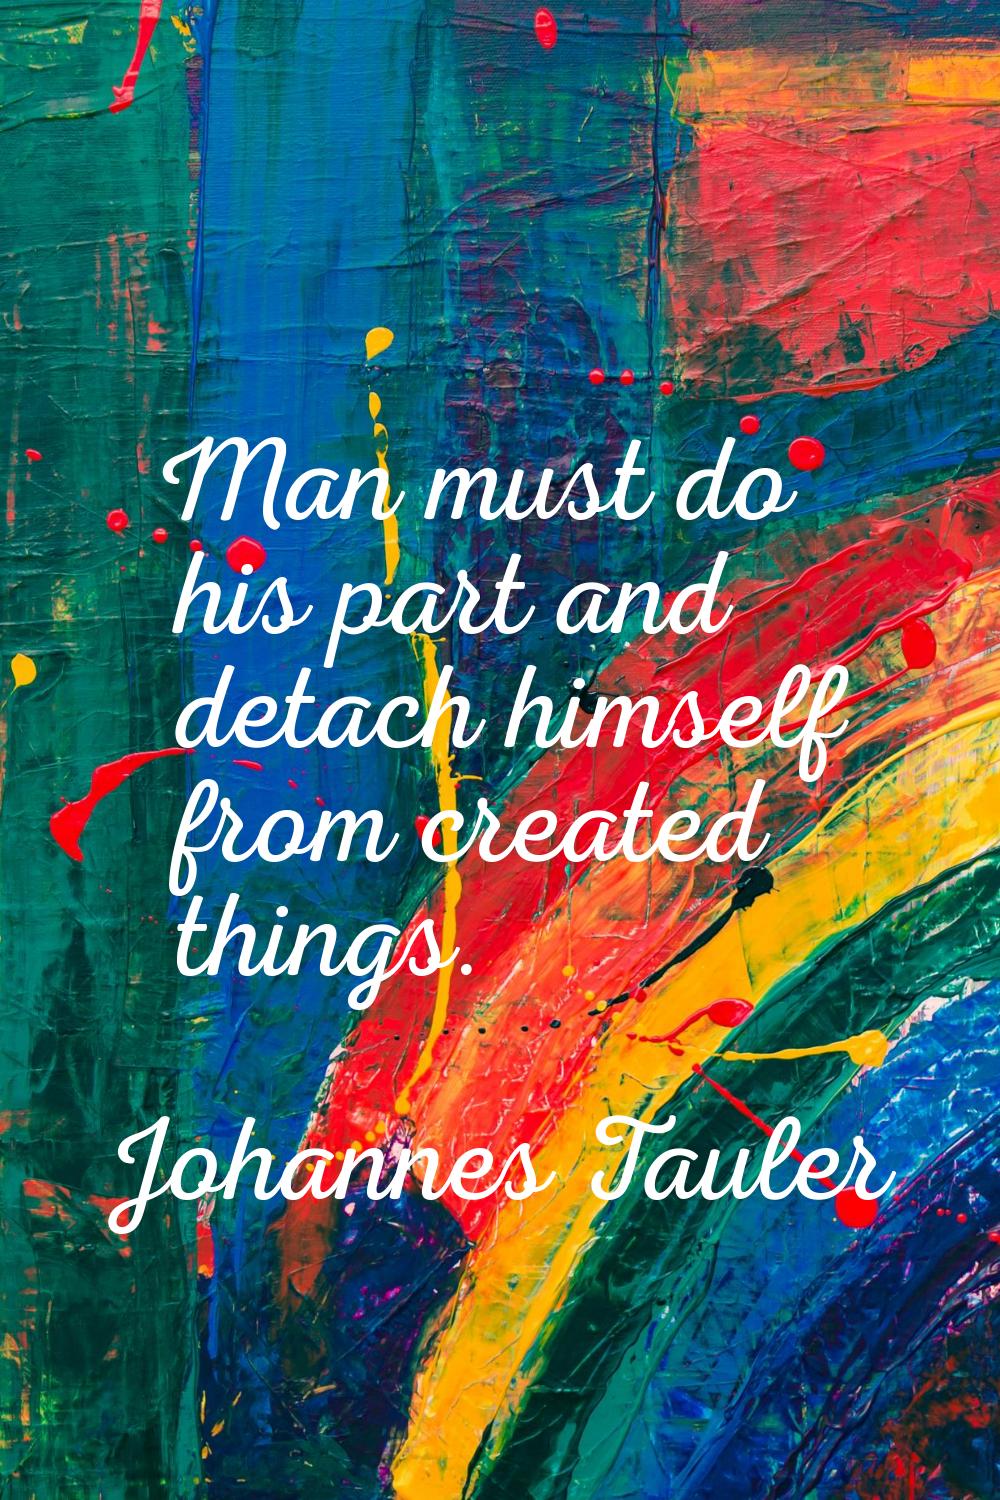 Man must do his part and detach himself from created things.